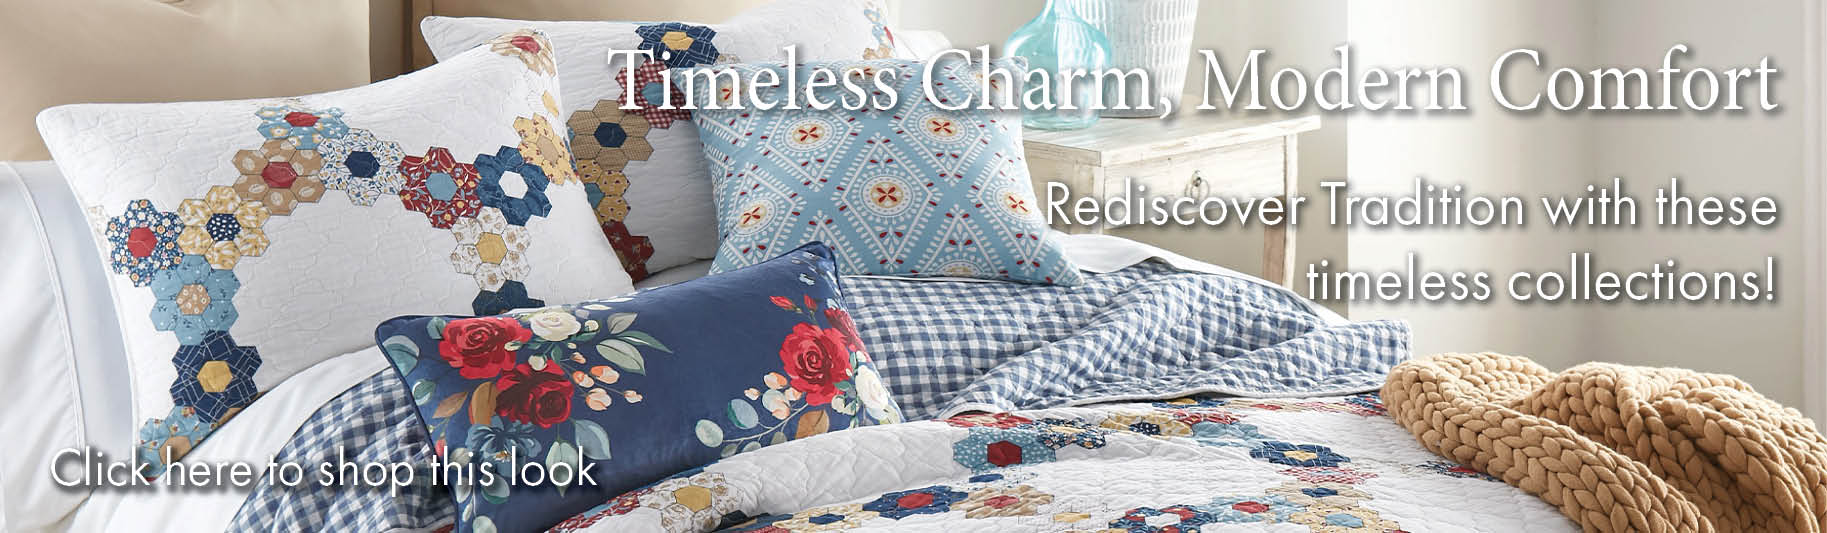 Timeless Charm, Modern Comfort - Rediscover Tradition with these timeless collections! 